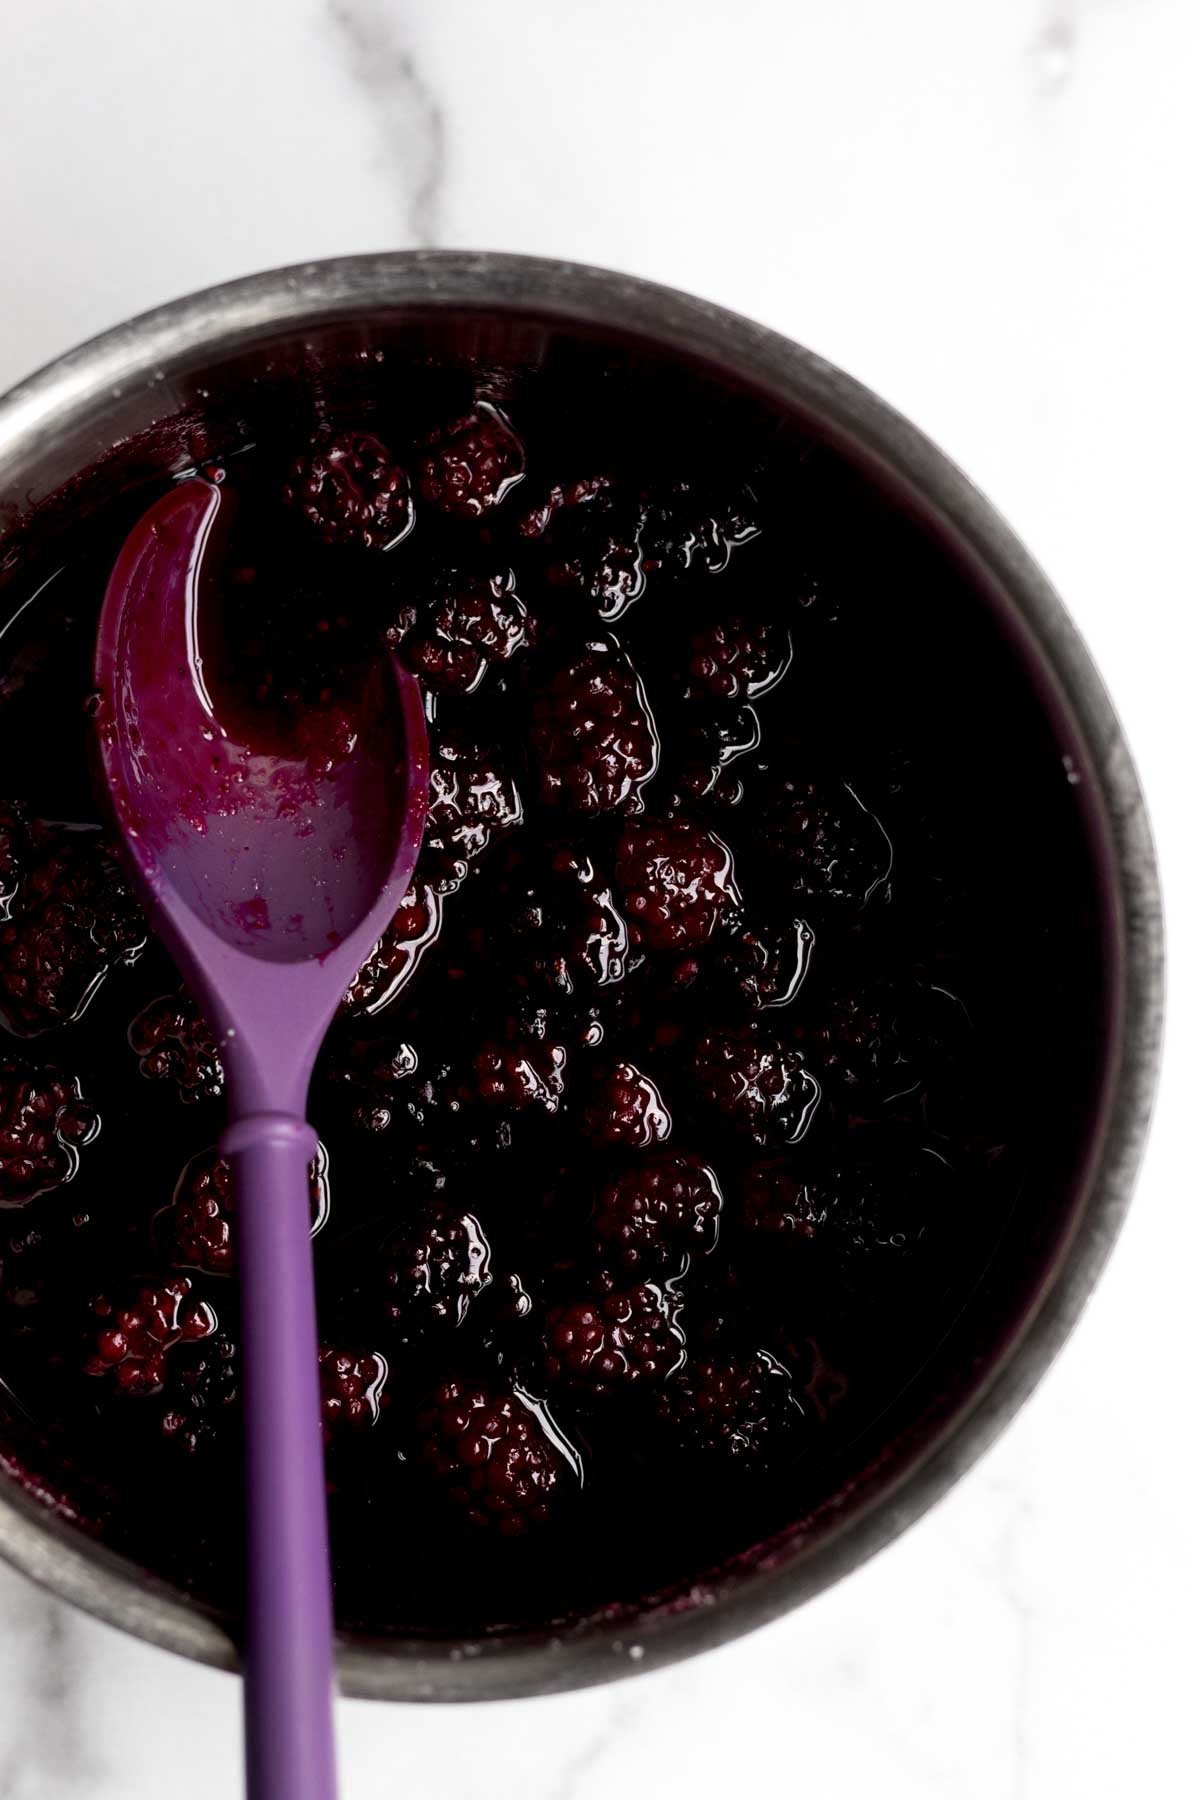 Heating up the blackberries and sugar and mixing with a purple spatula.